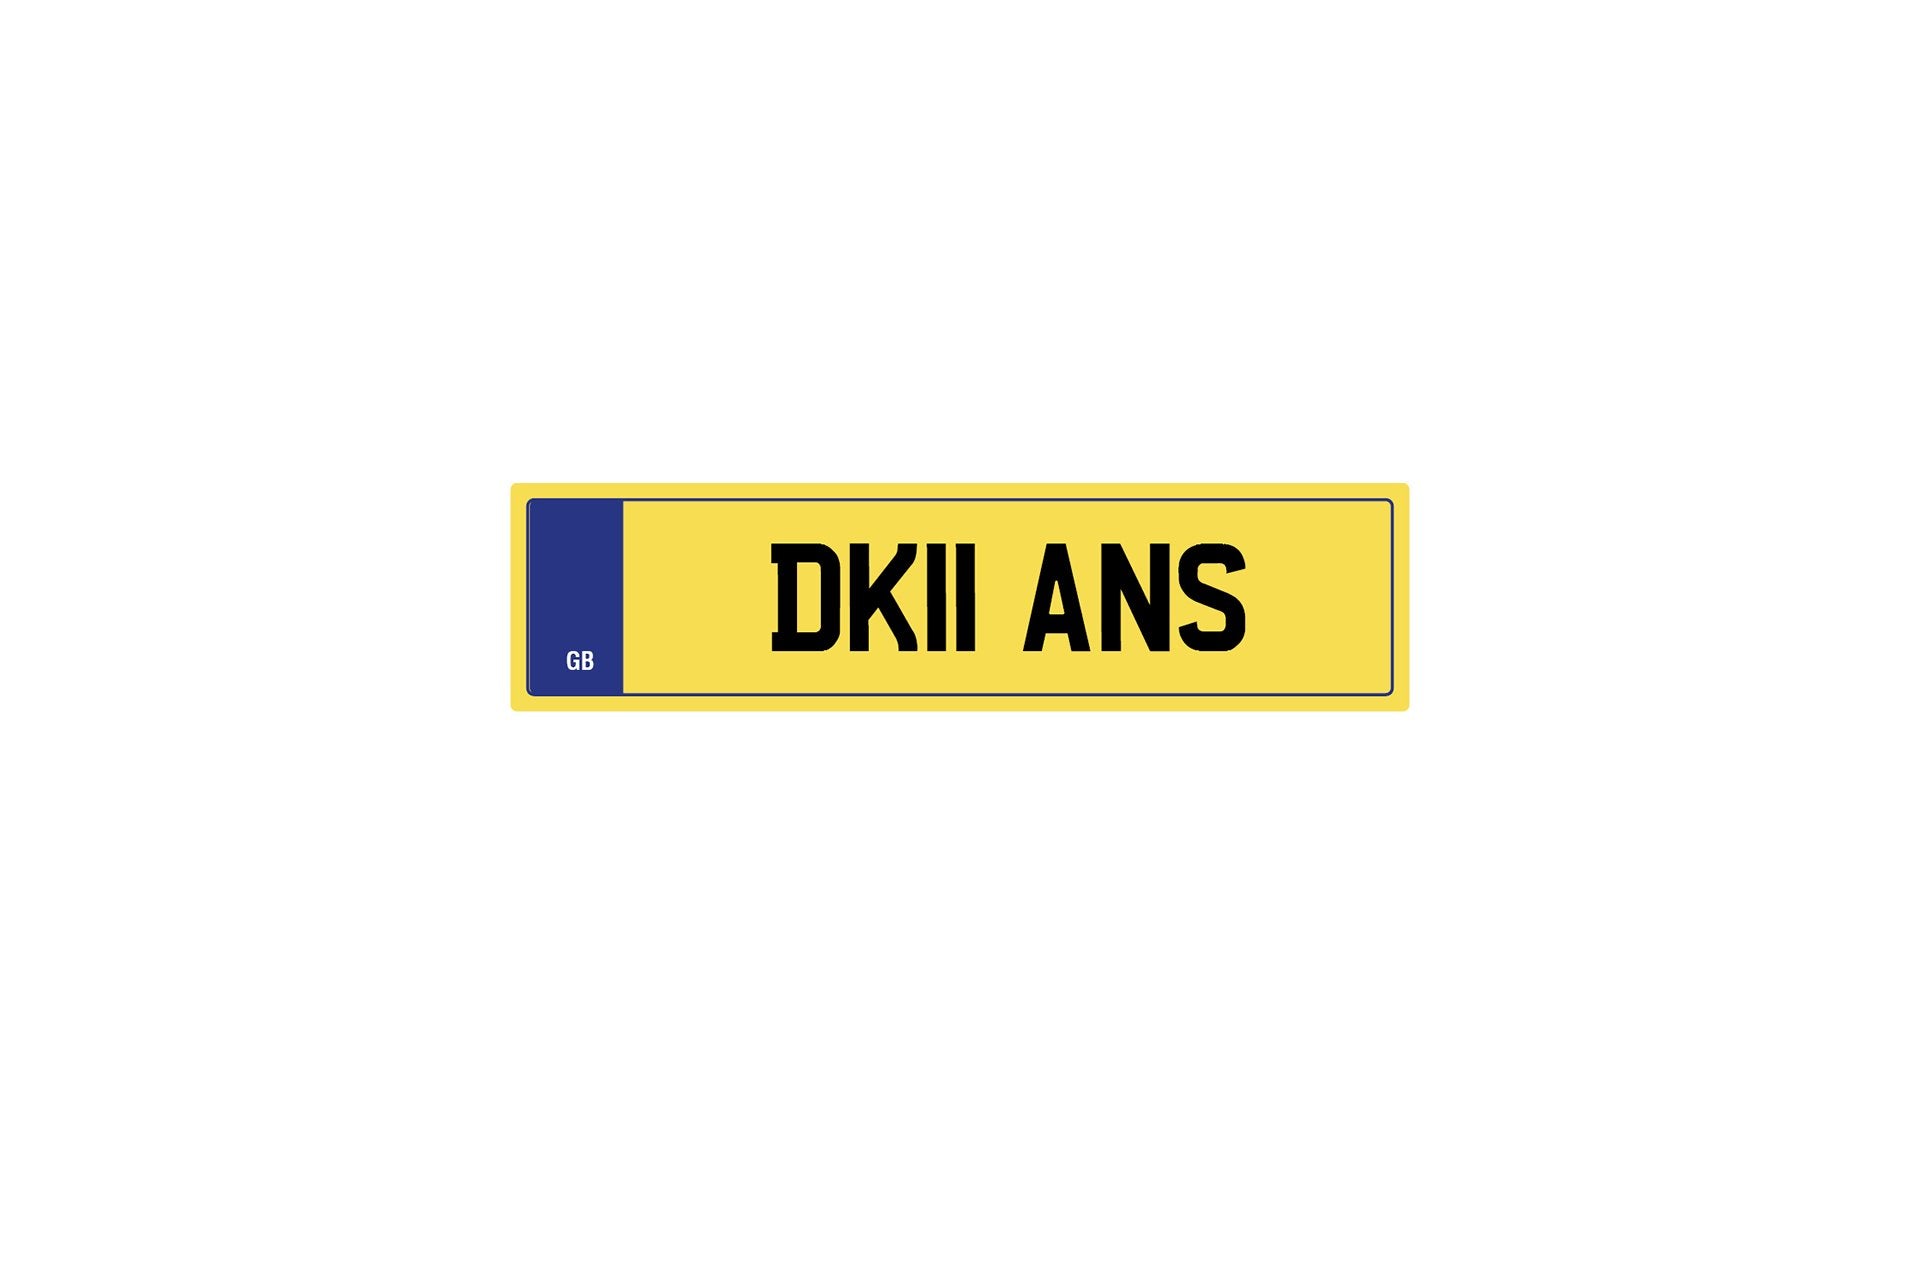 Private Plate Dk11 Ans by Kahn - Image 191